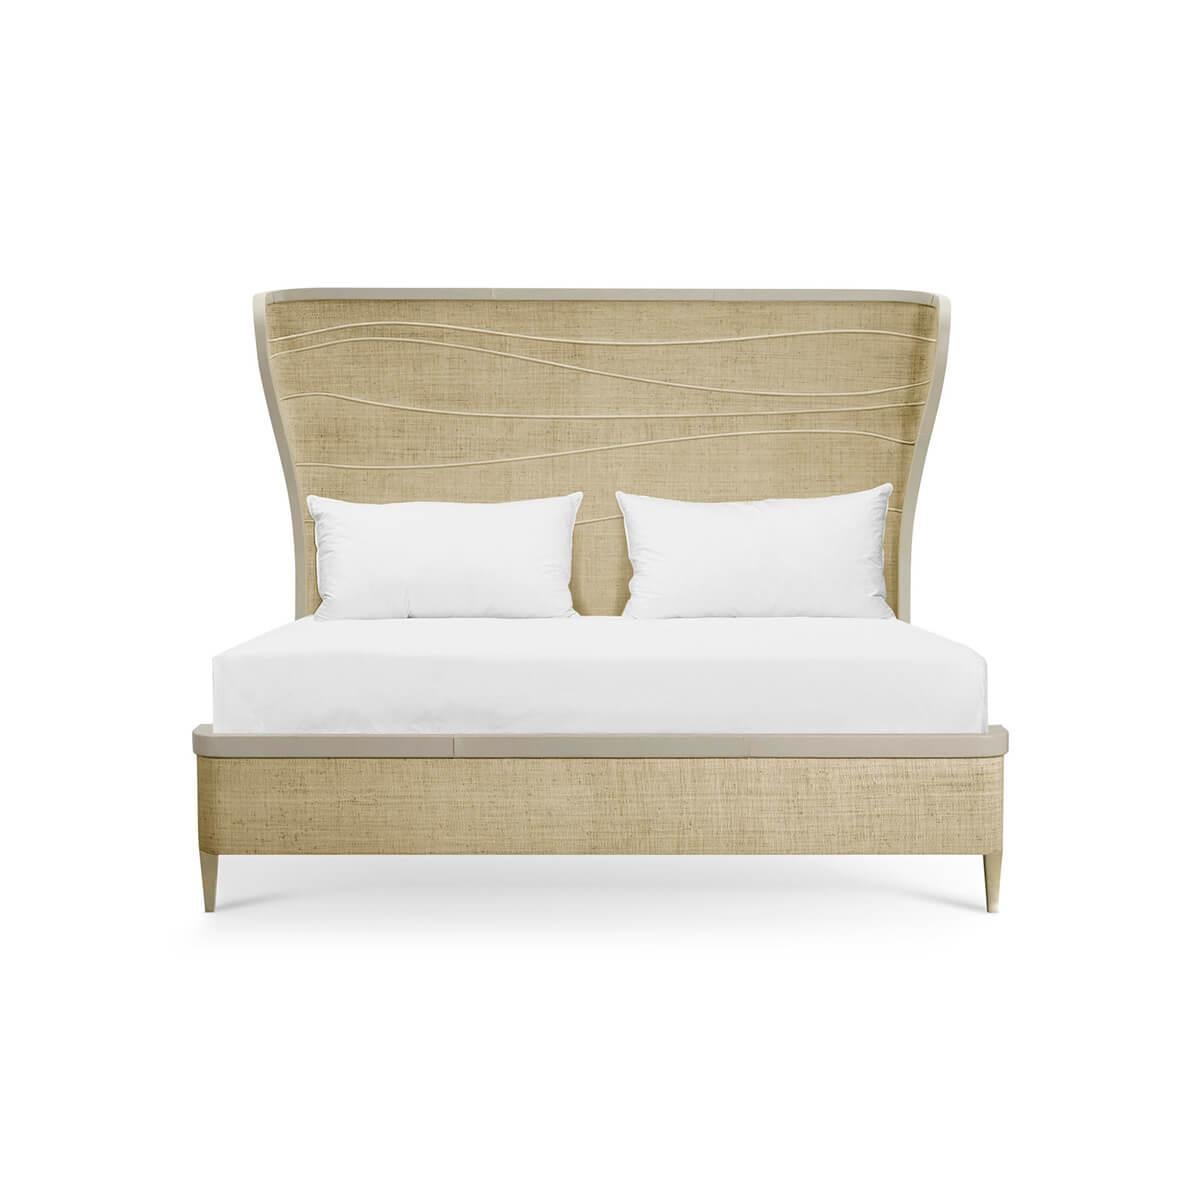 Born from passion with incredibly crafted aesthetic details, the bed's captivating lines and sublime curves promise a new level of interior expression.

Subtle shades of handwoven grasscloth are surrounded by a soft creme leather frame in an